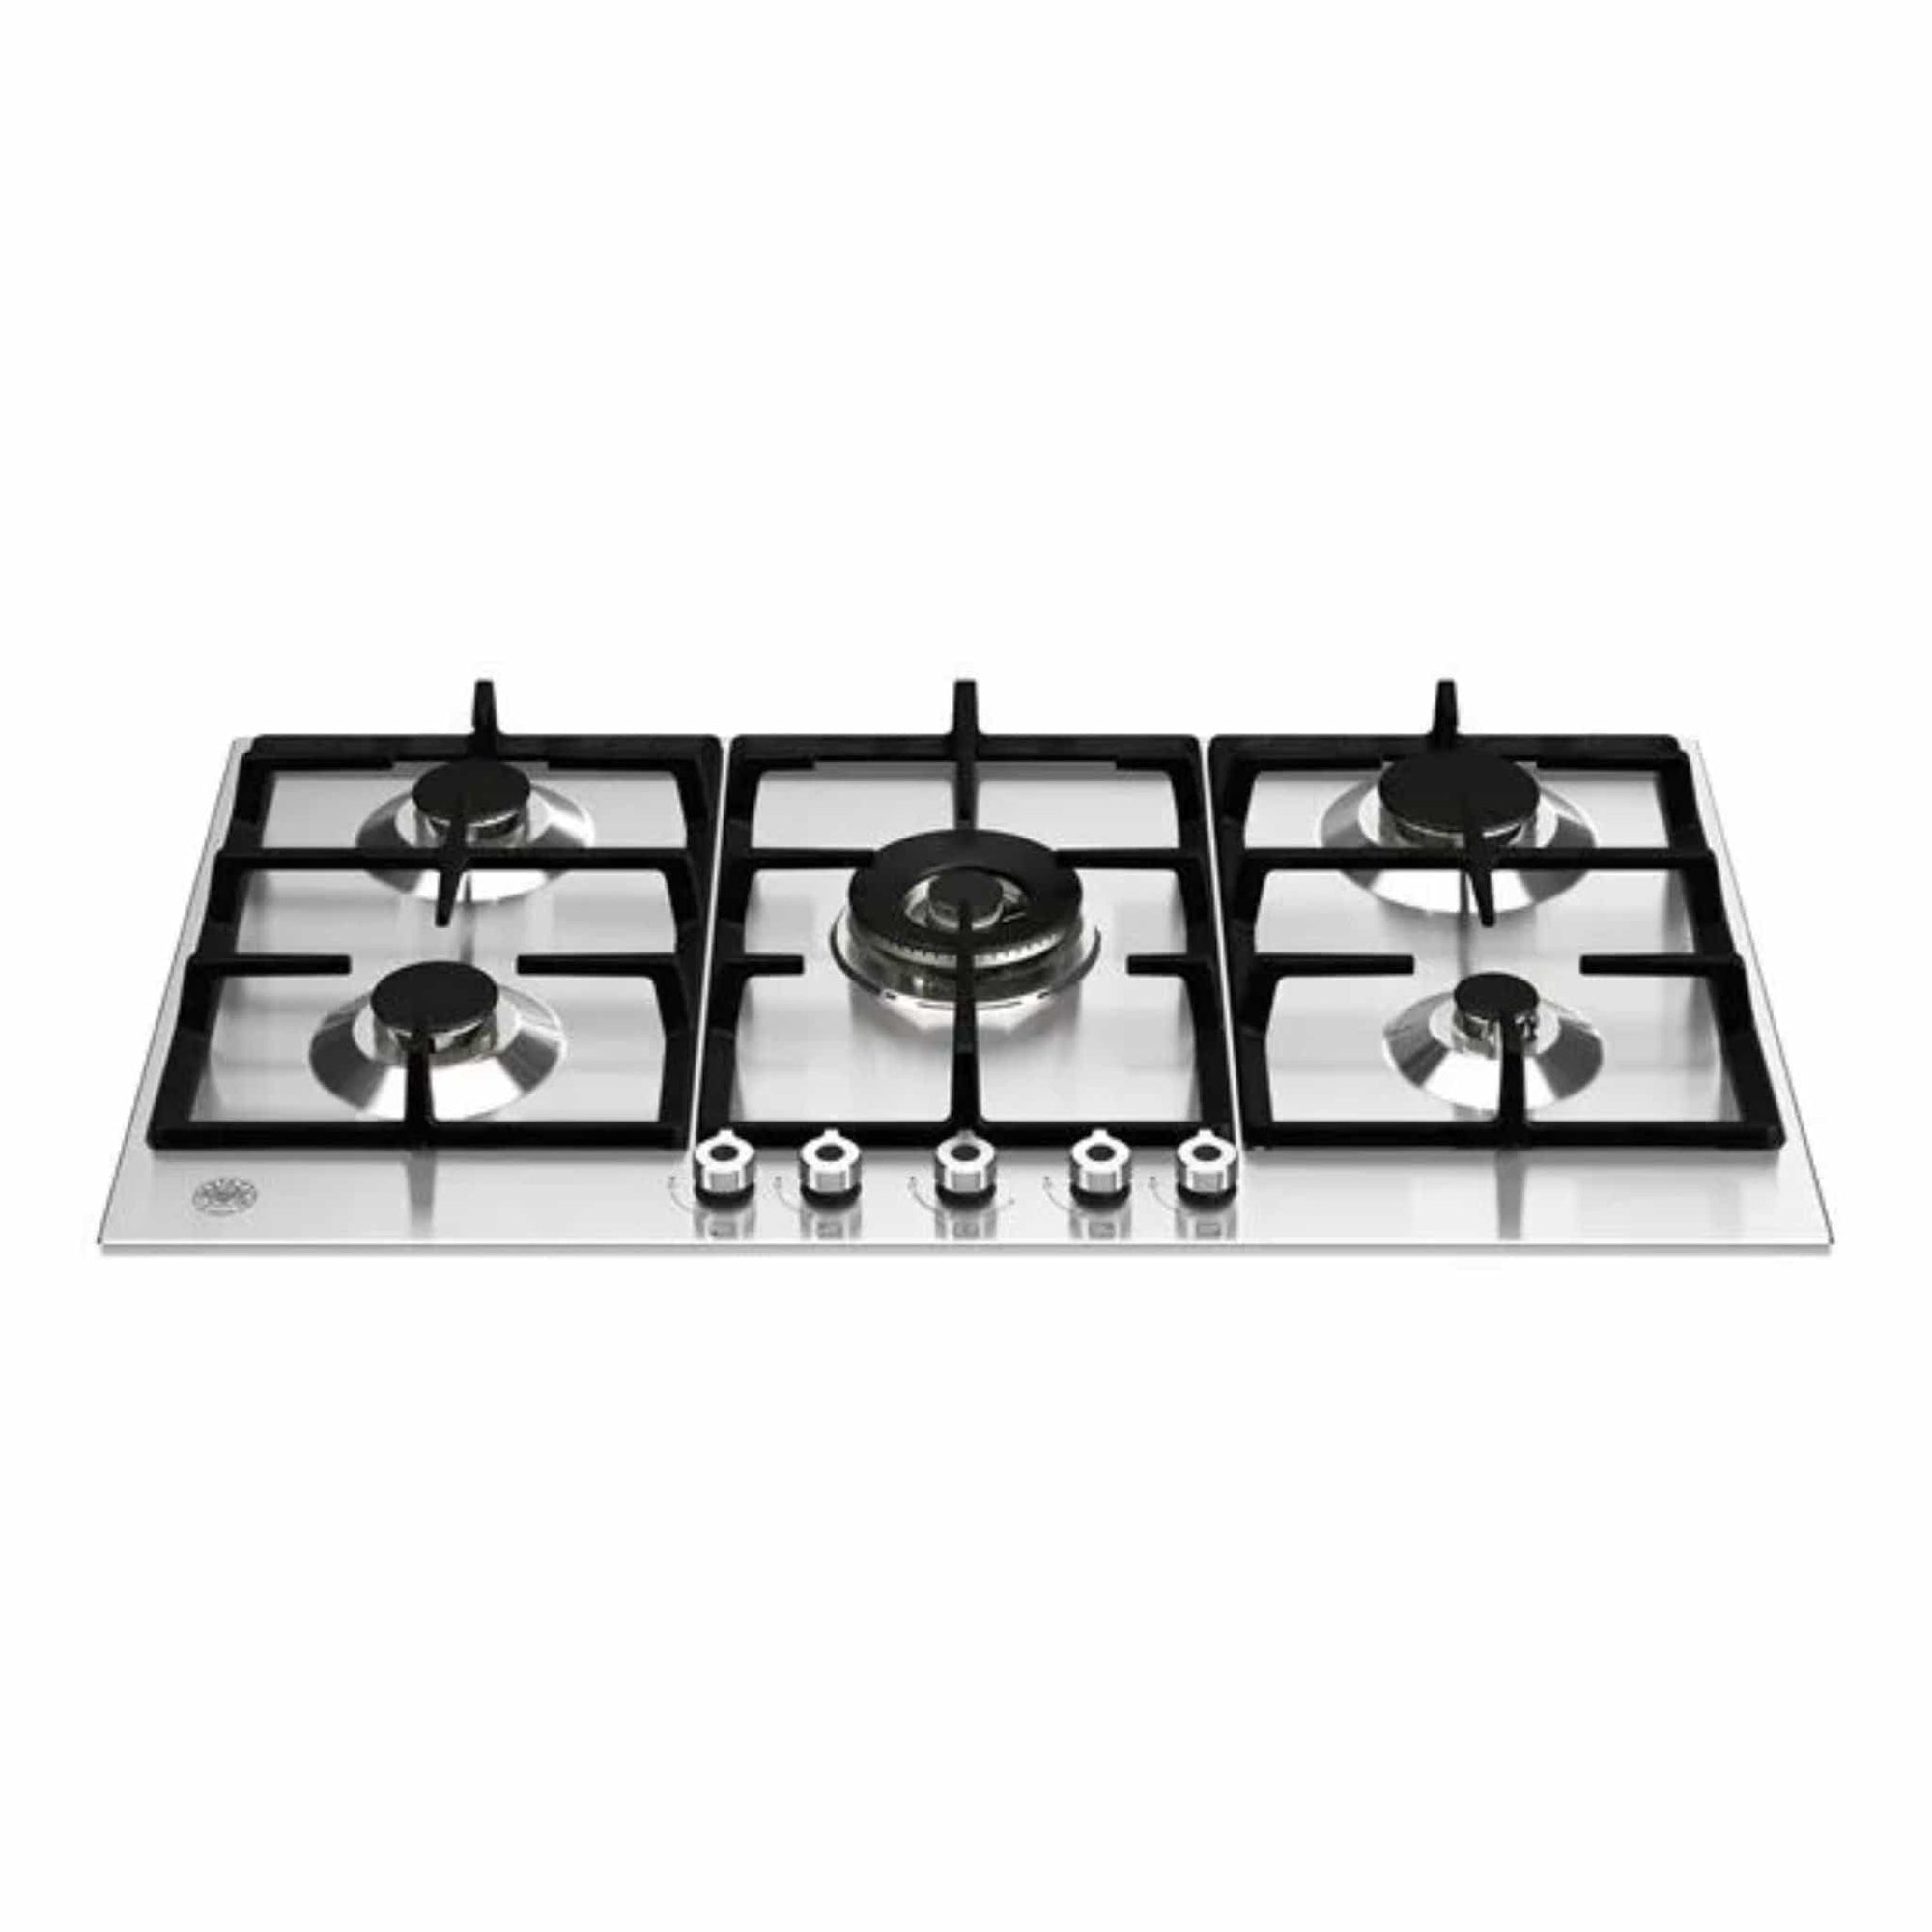 Bertazzoni 36" Pro Series Front Control Gas Cooktop 5 Burners - Culinary Hardware